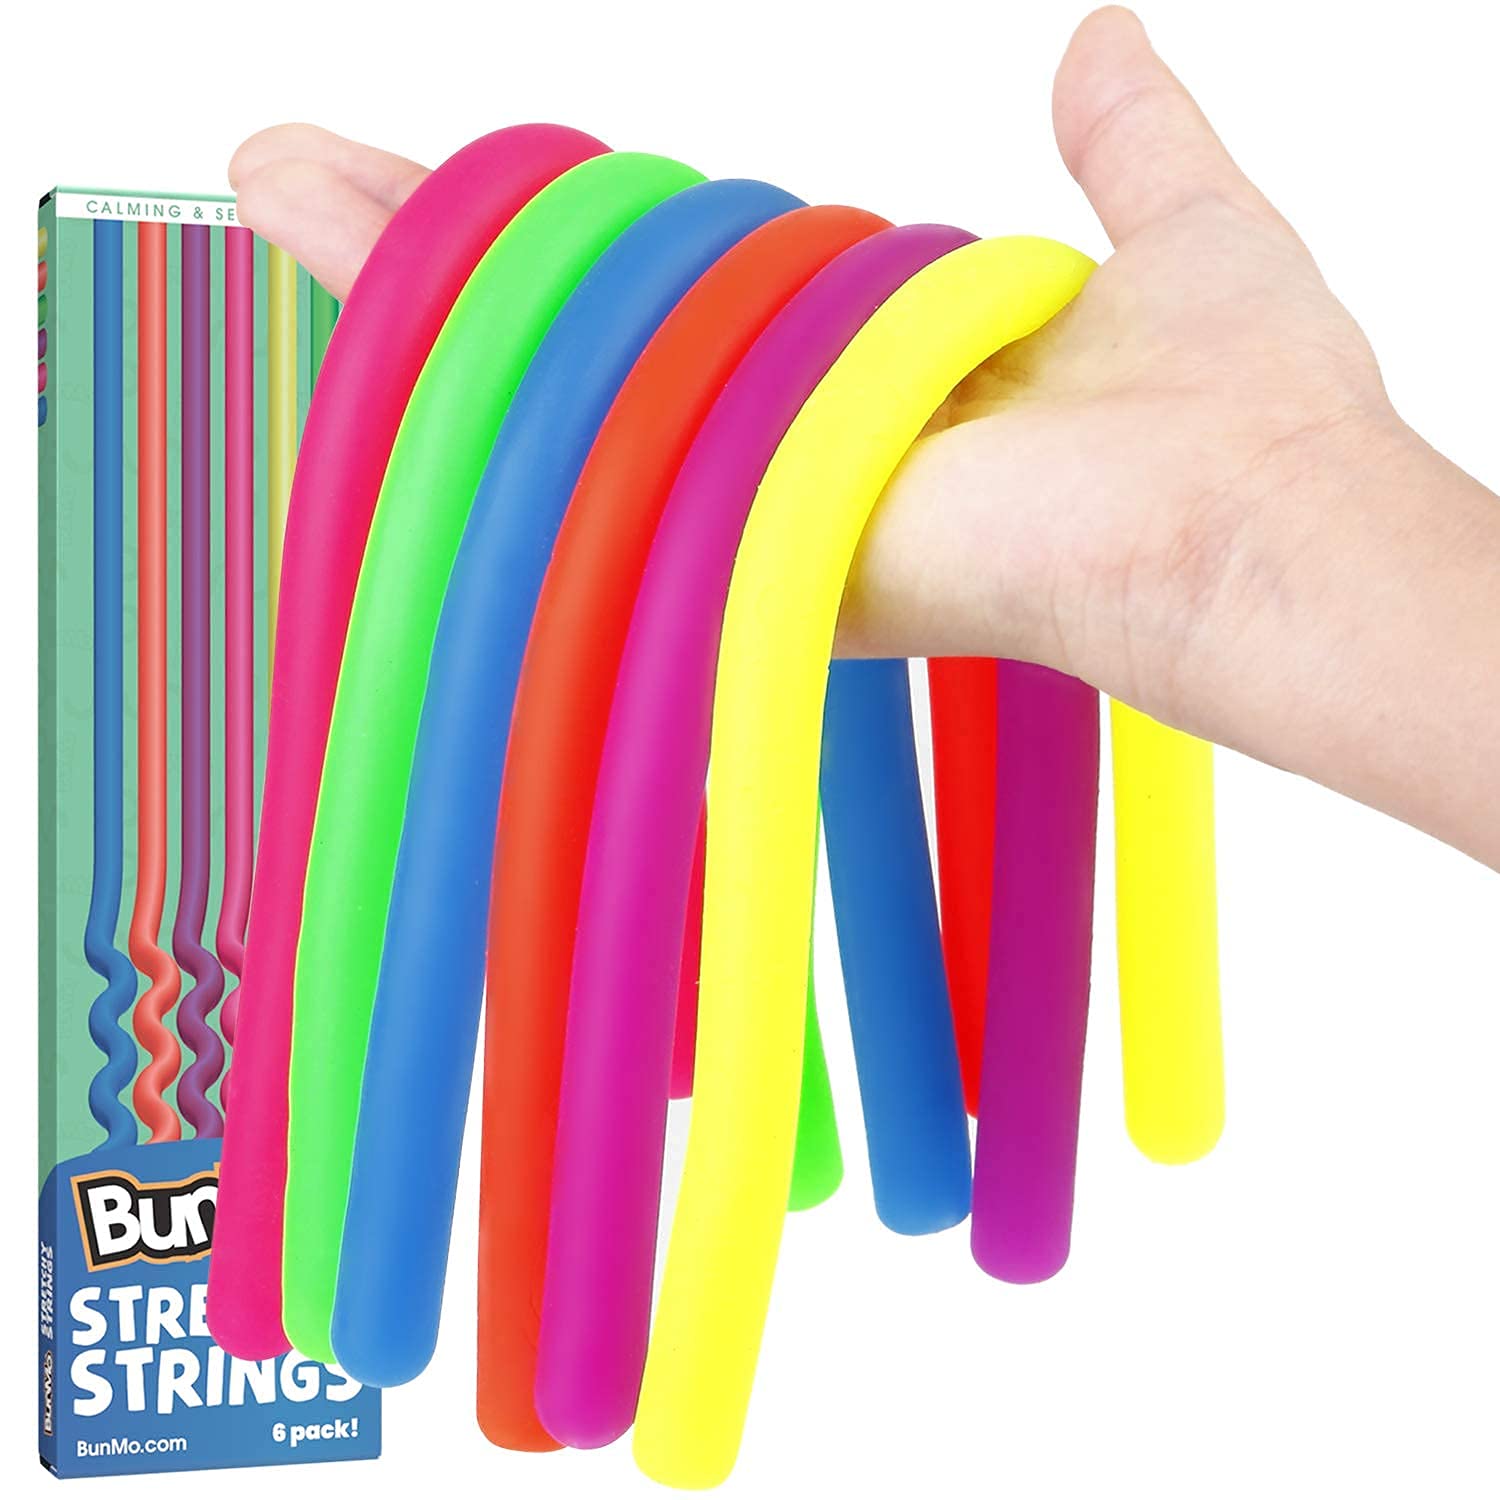 BunMo Multi Item Stretchy Strings Fidget Toy 6PK - Calming Sensory Stretchy Strings Anxiety Relief Items